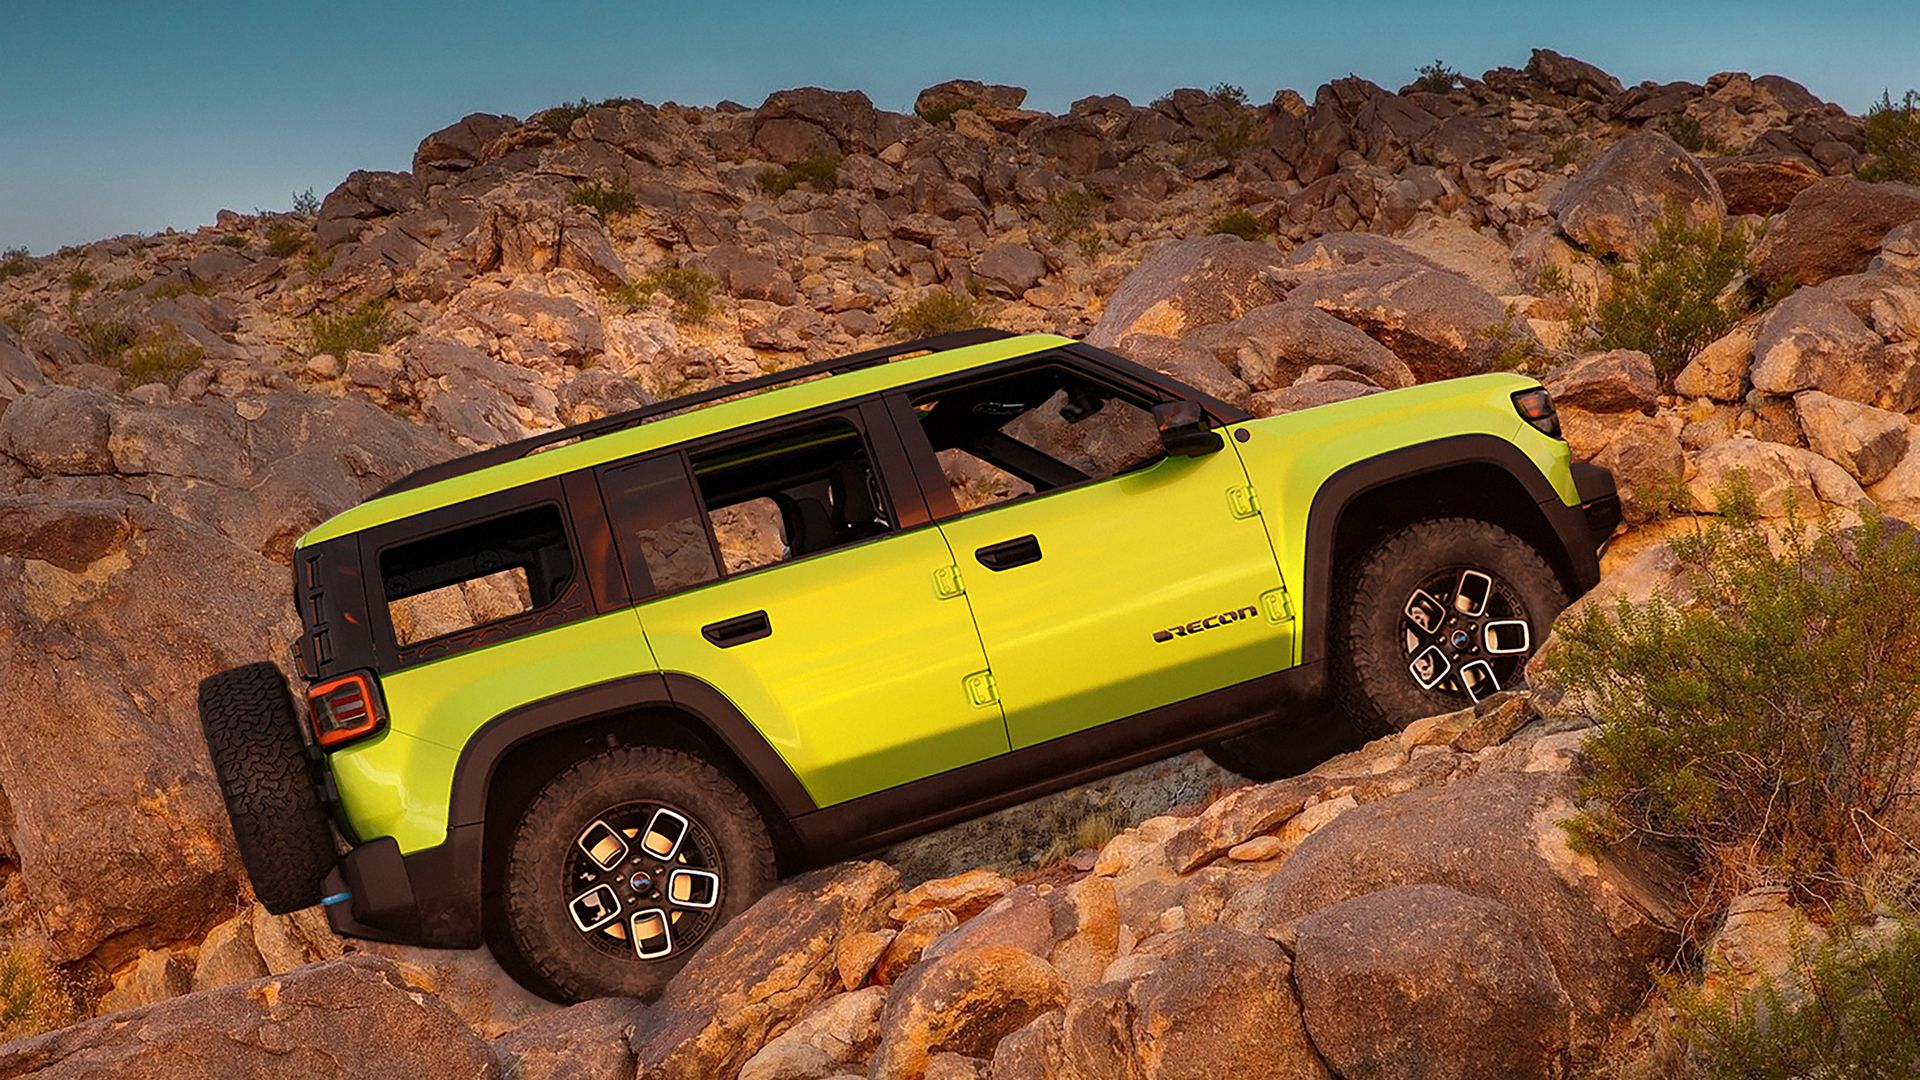 Image of the new electric Jeep Recon SUV